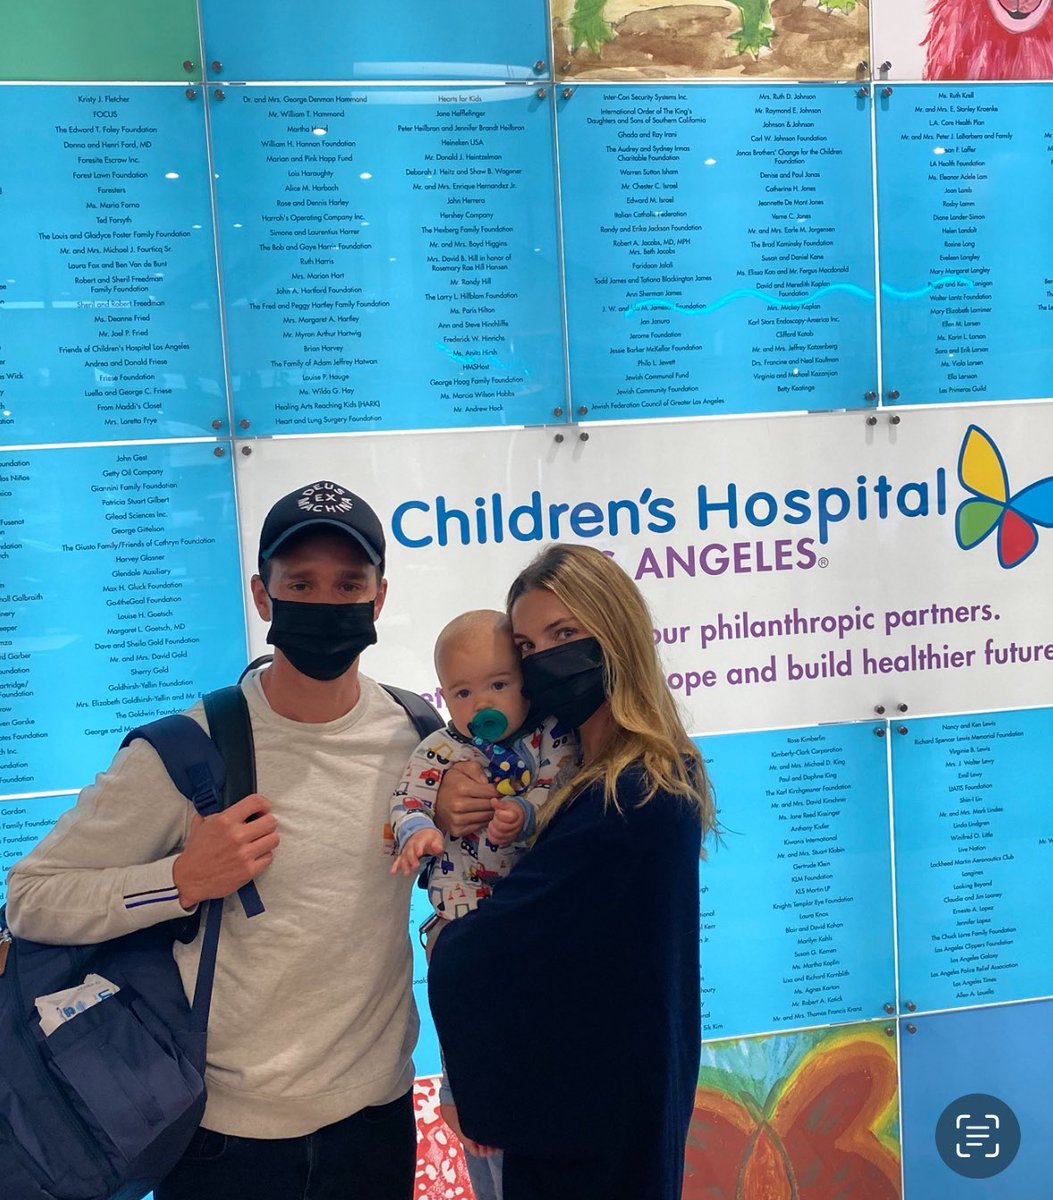 LA friends, please join me tomorrow morning at the Santa Monica Pier for the @ChildrensLA Walk and Play. I’ll be hosting a soccer clinic from 8-9:30 am and would love to see your faces. We are so thankful for the amazing doctors and nurses for their work with our son Remi.